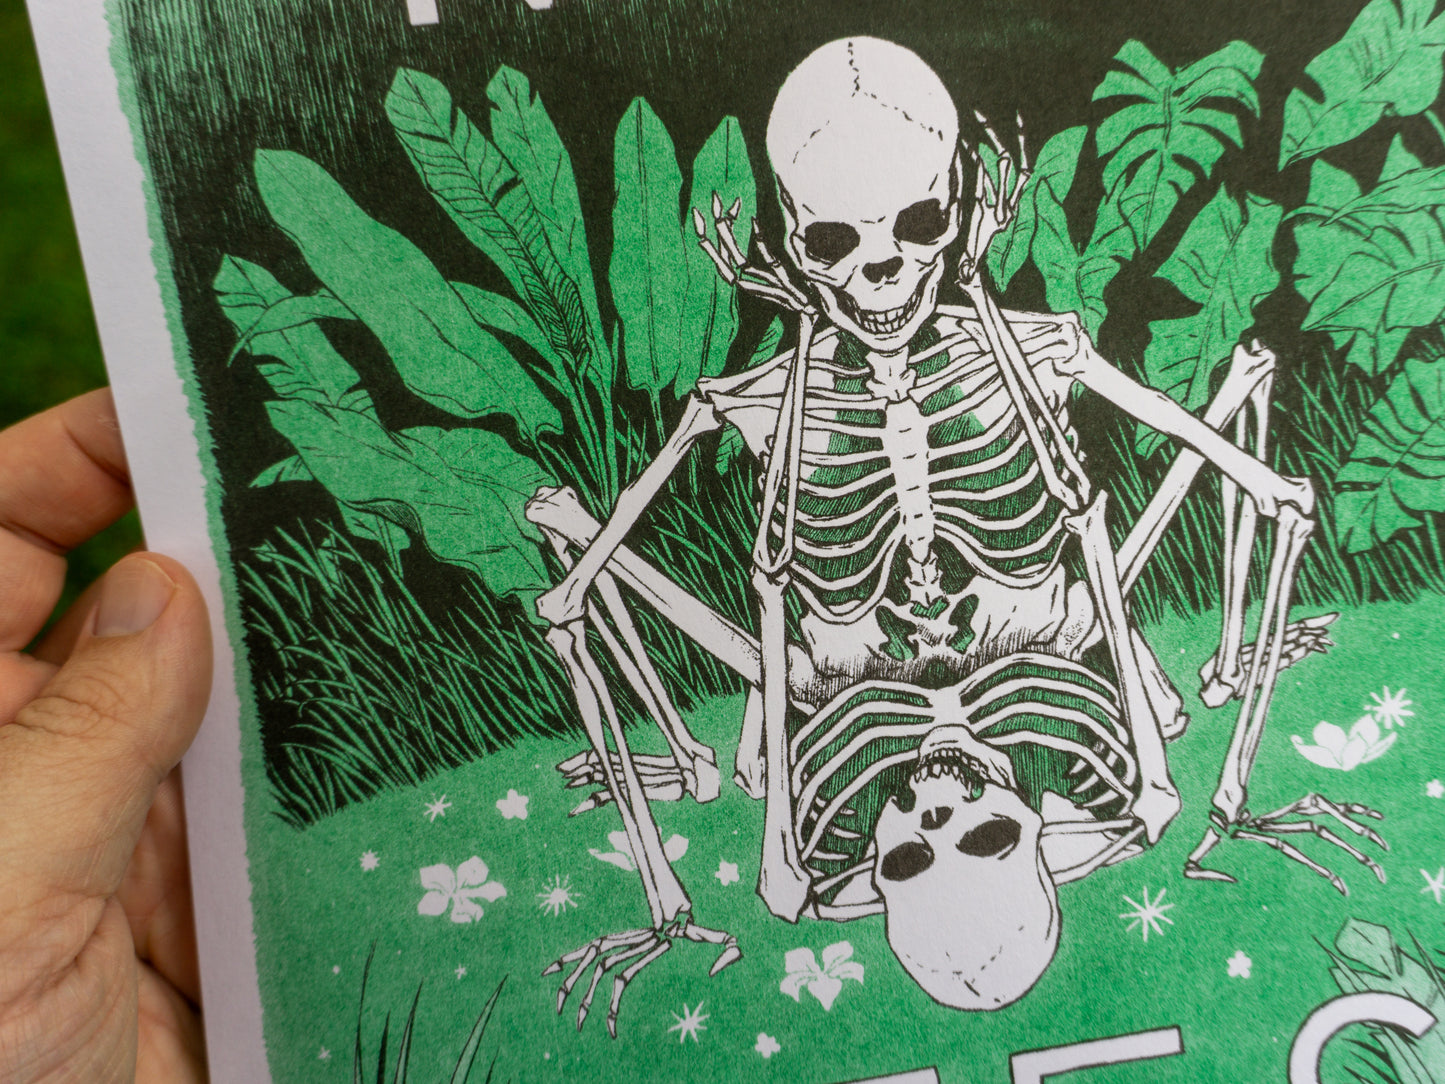 Close up image of an art print on paper held in one hand. The artwork has two skeletons doing it behind some bushes.